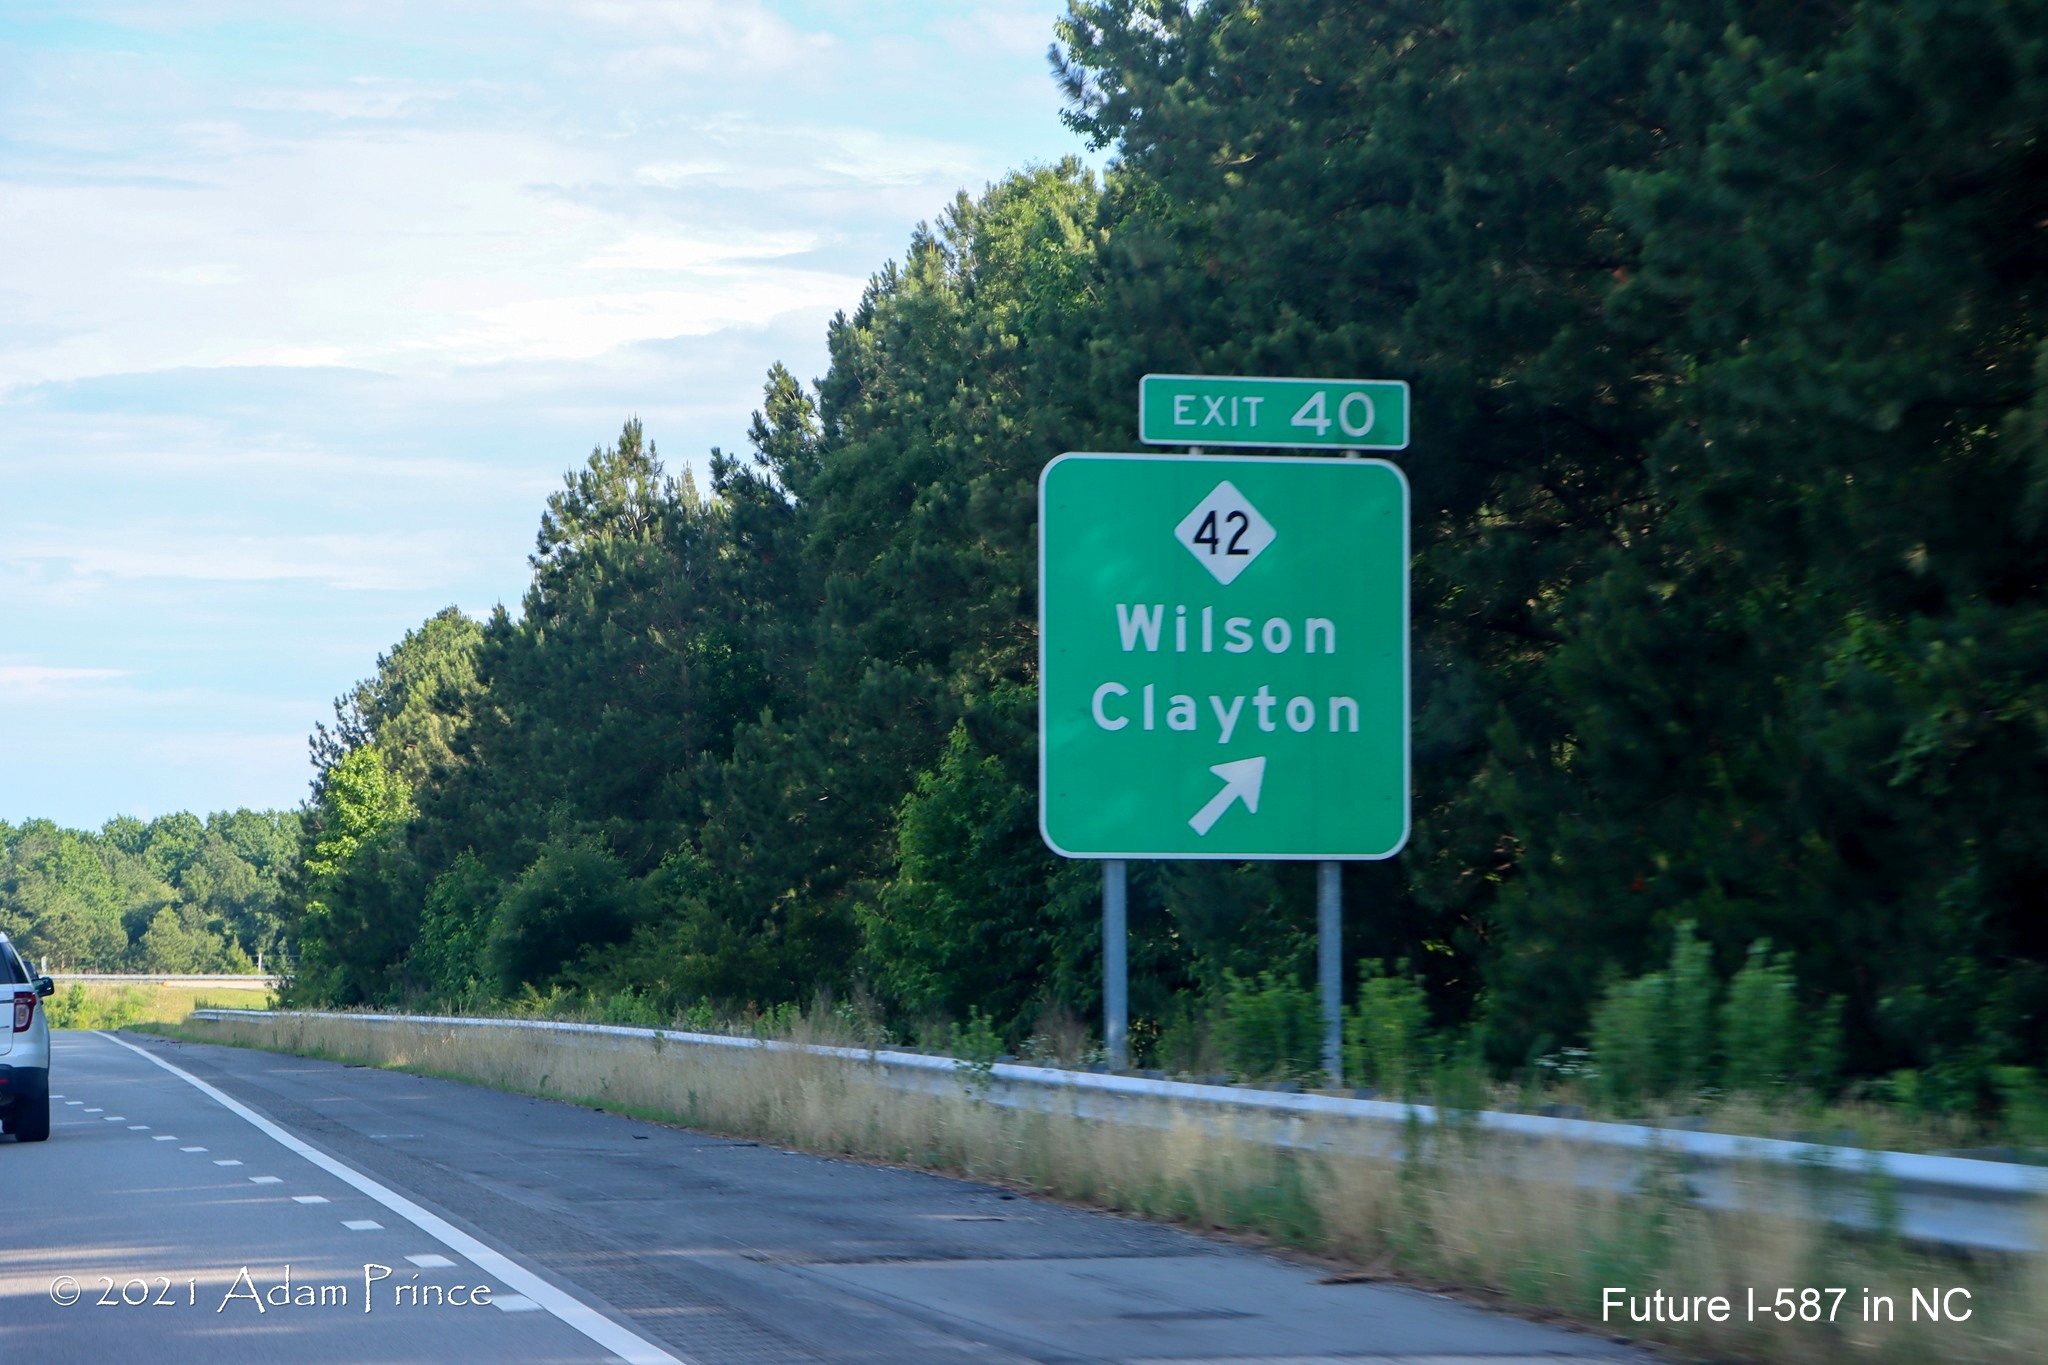 Ground mounted ramp sign for NC 42 exit on US 264 East (Future I-587 South) in Wilson, photo by Adam Prince, June 2021